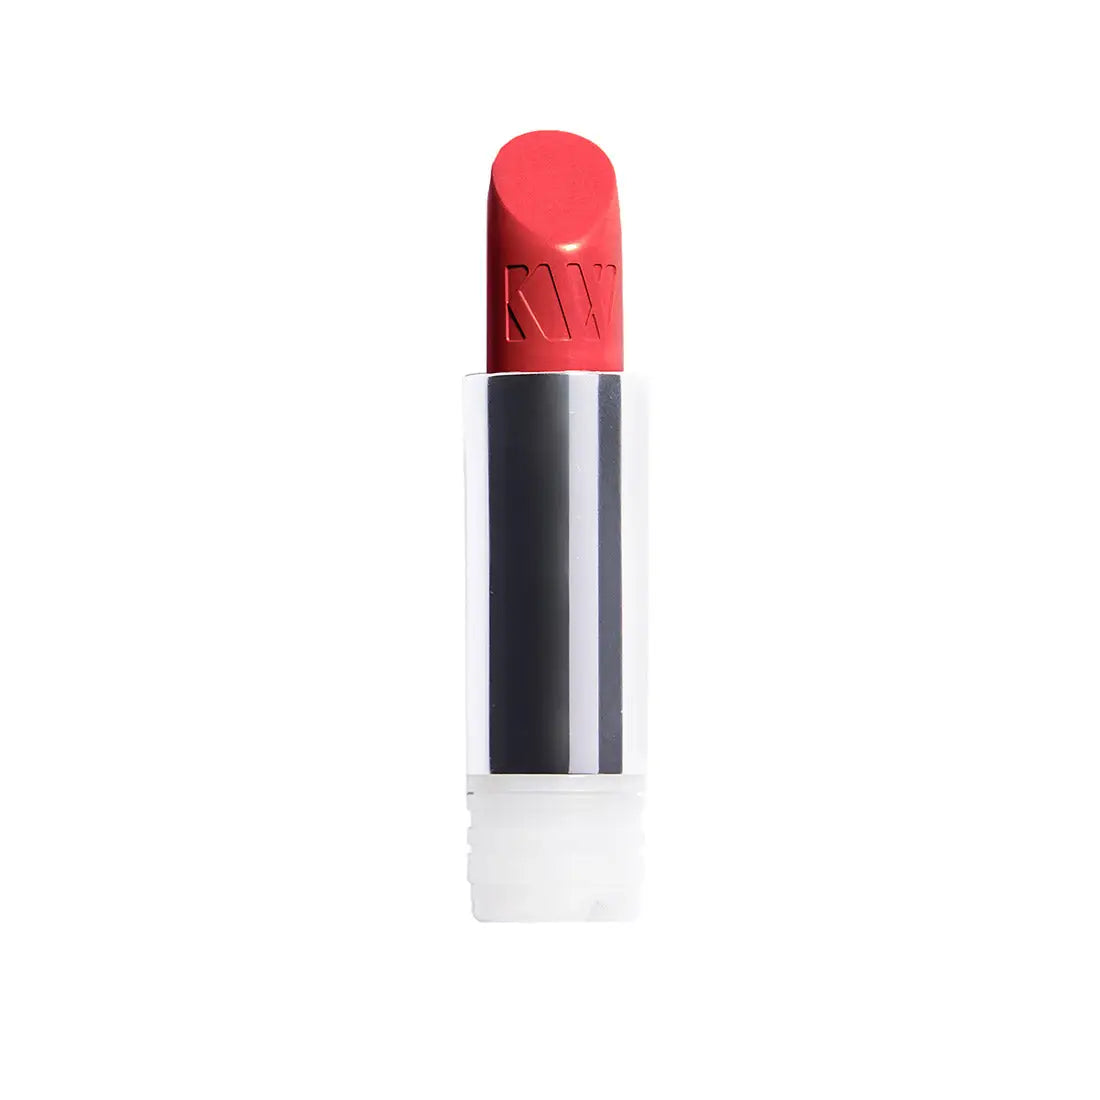 Kjaer Weis Lipstick Refill - Amour Rouge Free Shipping 